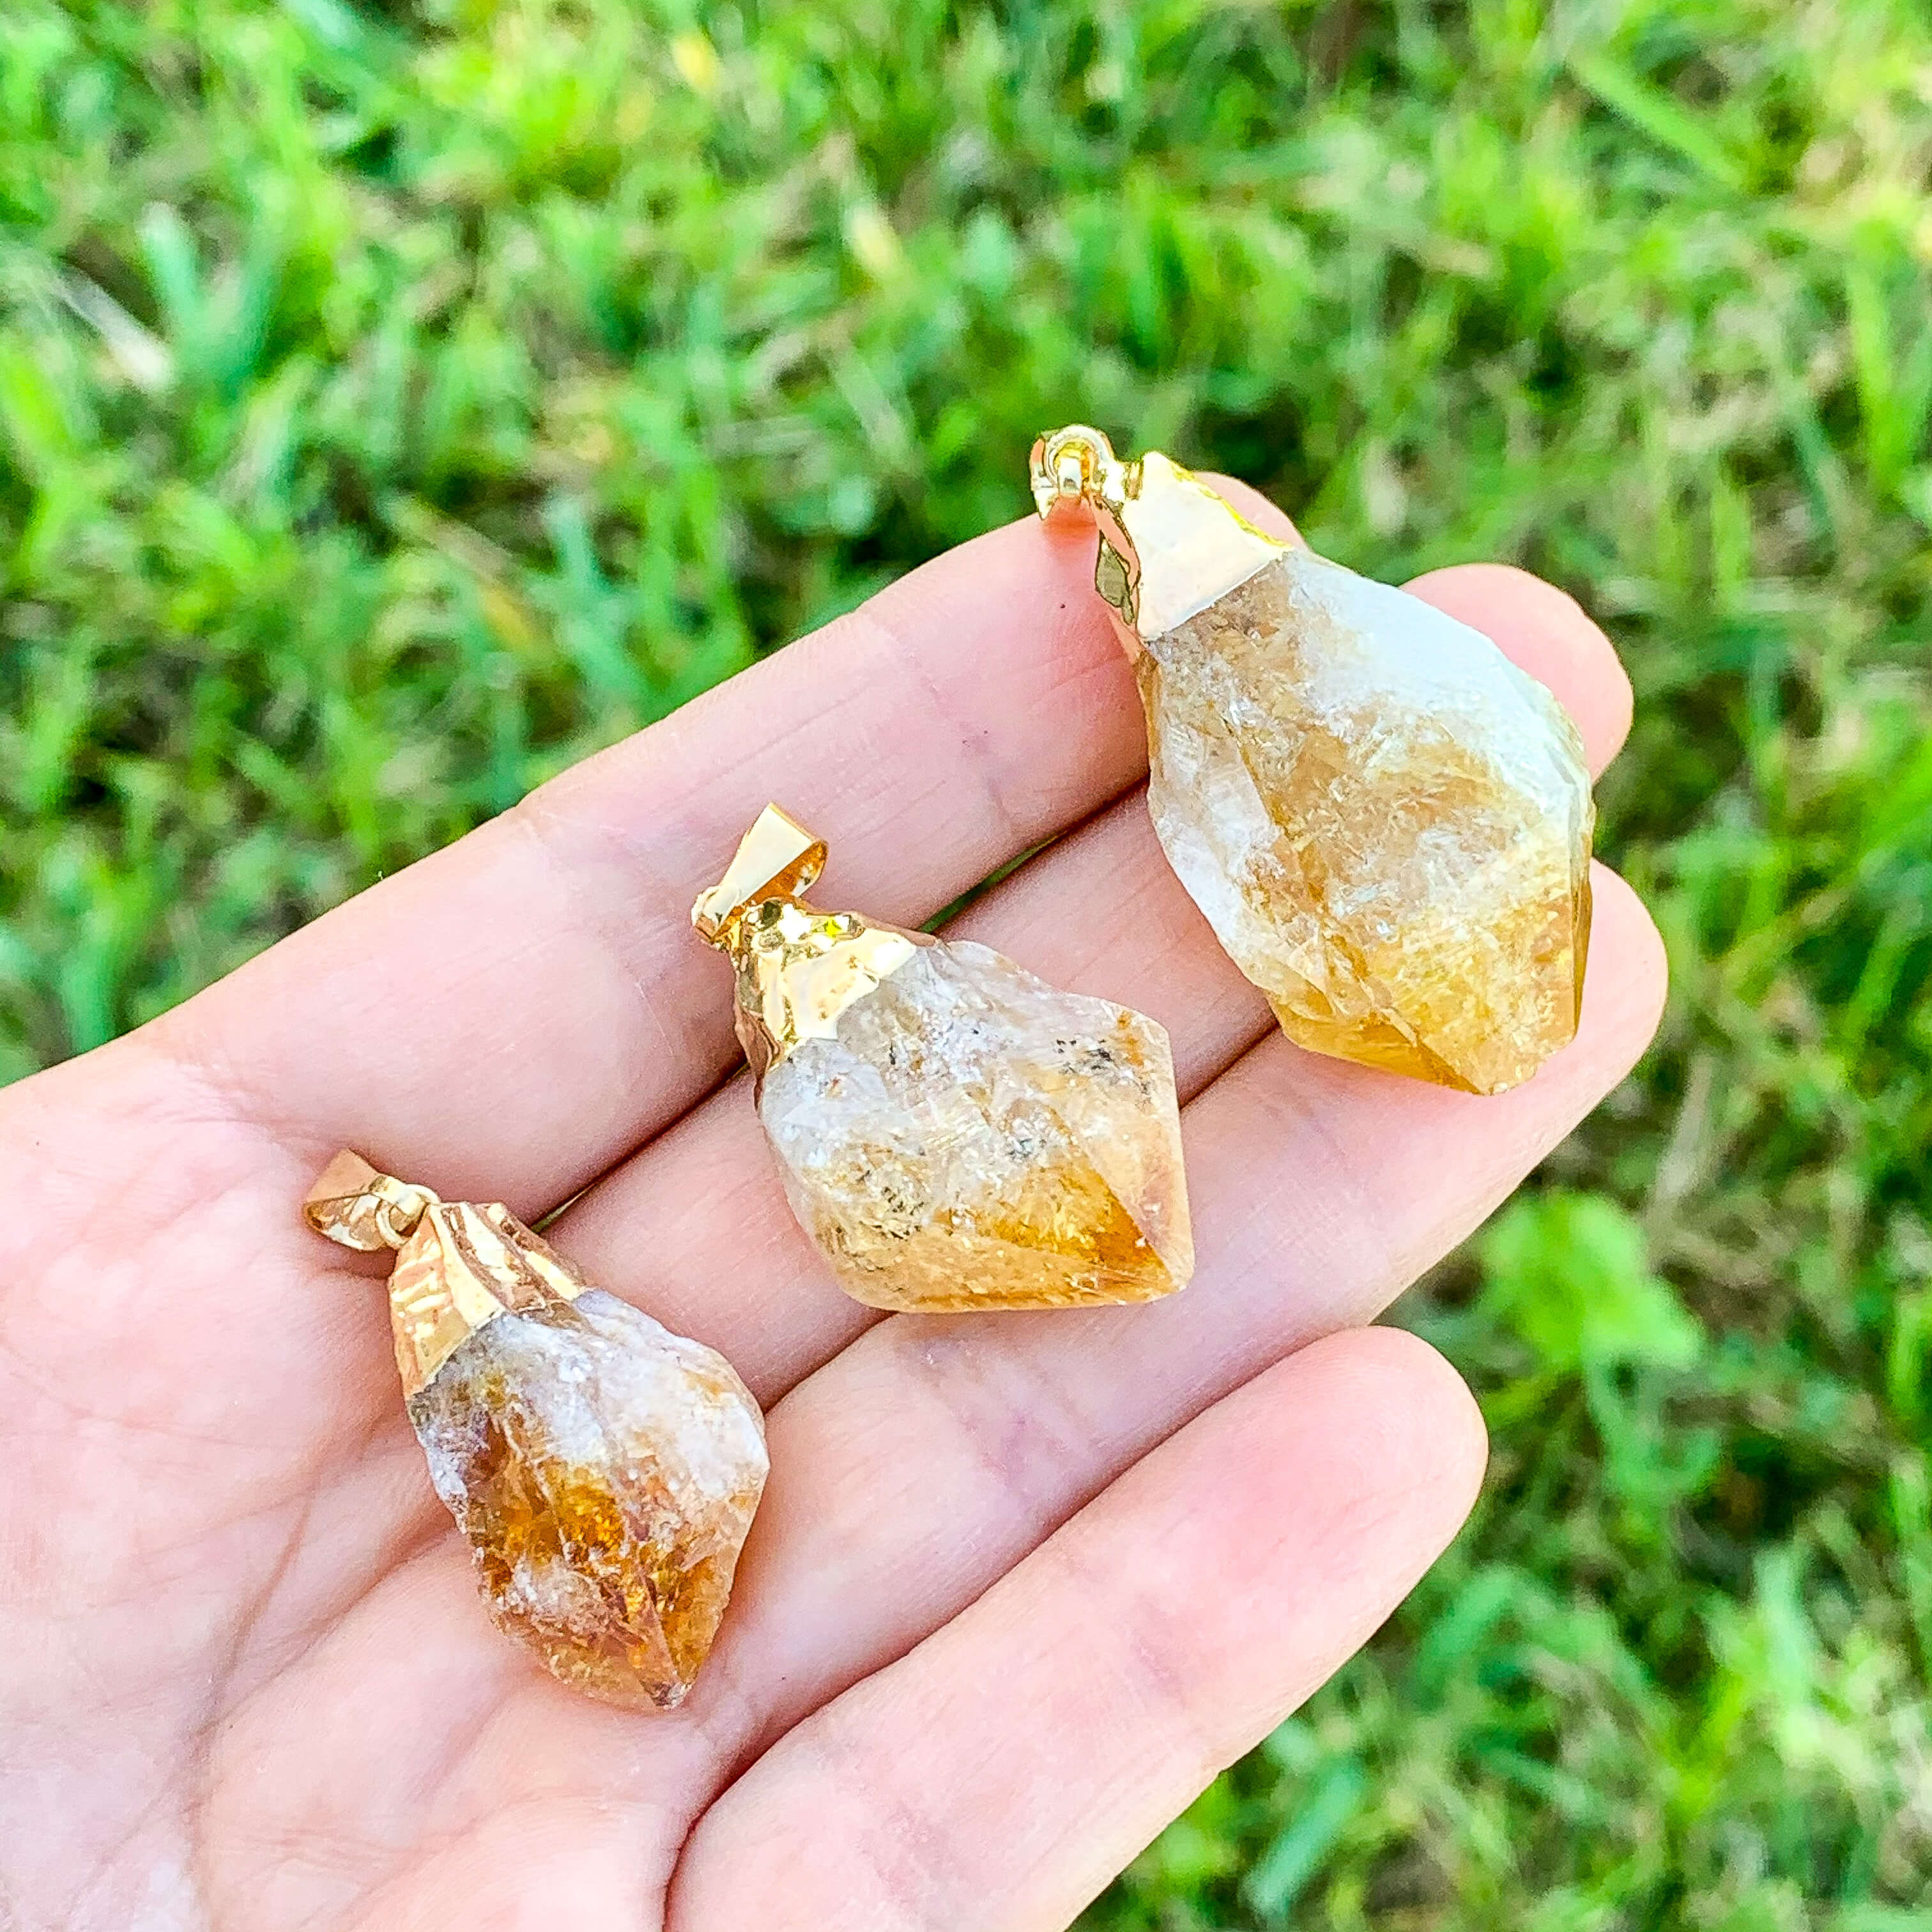 High Fortune Raw Citrine Crystal Pendant Necklace in 18k Gold Plating |  Bohemia Necklace raw crystal healing citrine - Shop Healing Spiritual  Crystals & Jewelry | Boho Beautiful Soul